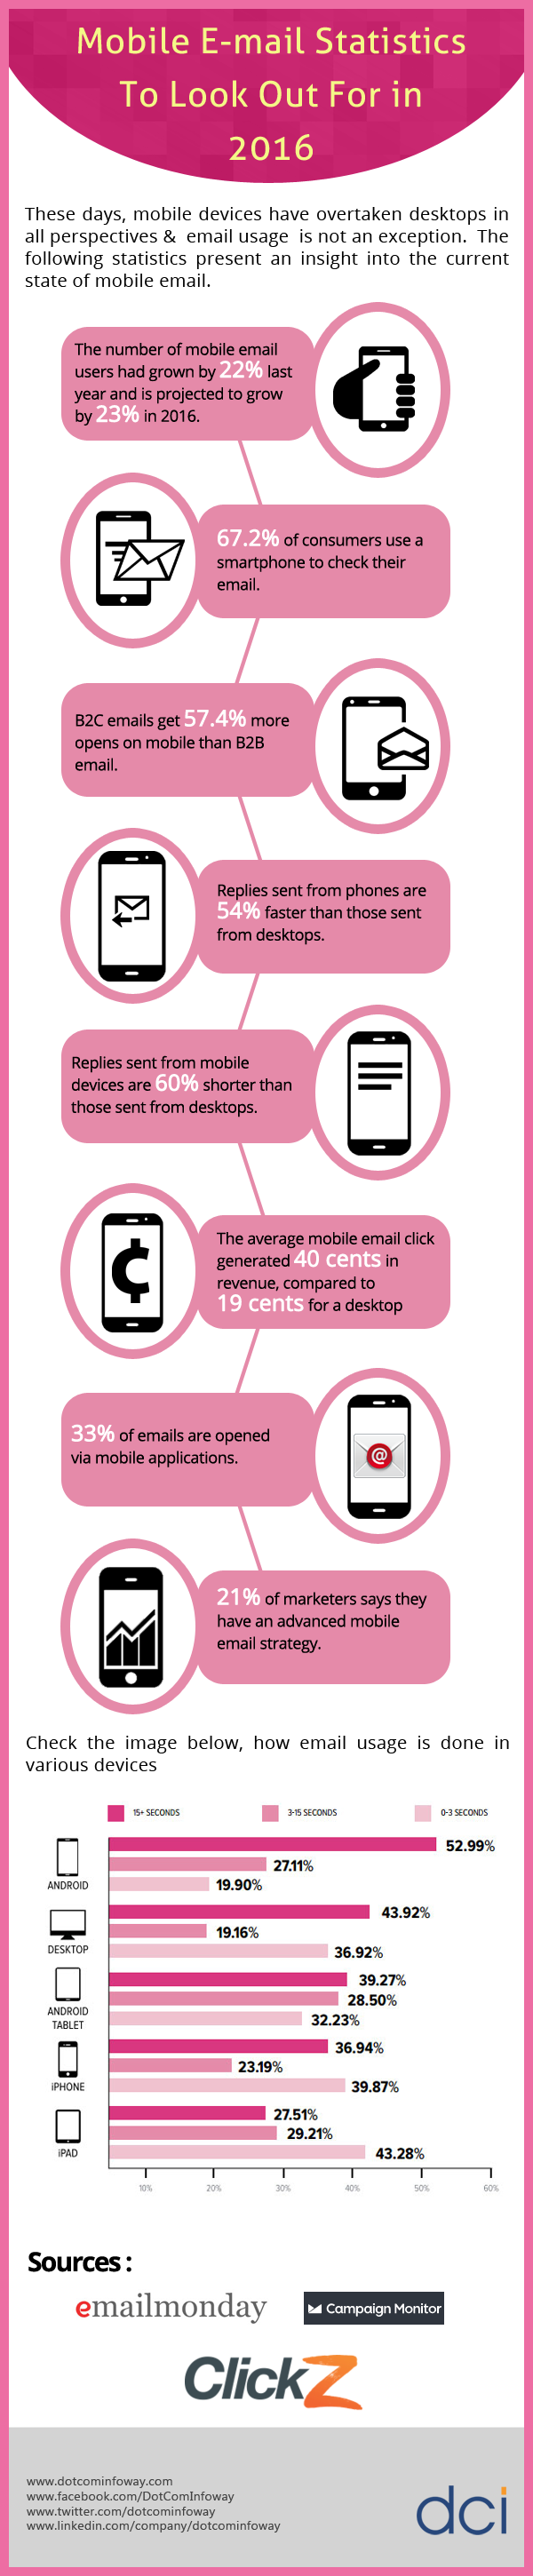 Mobile Email Stats 2016